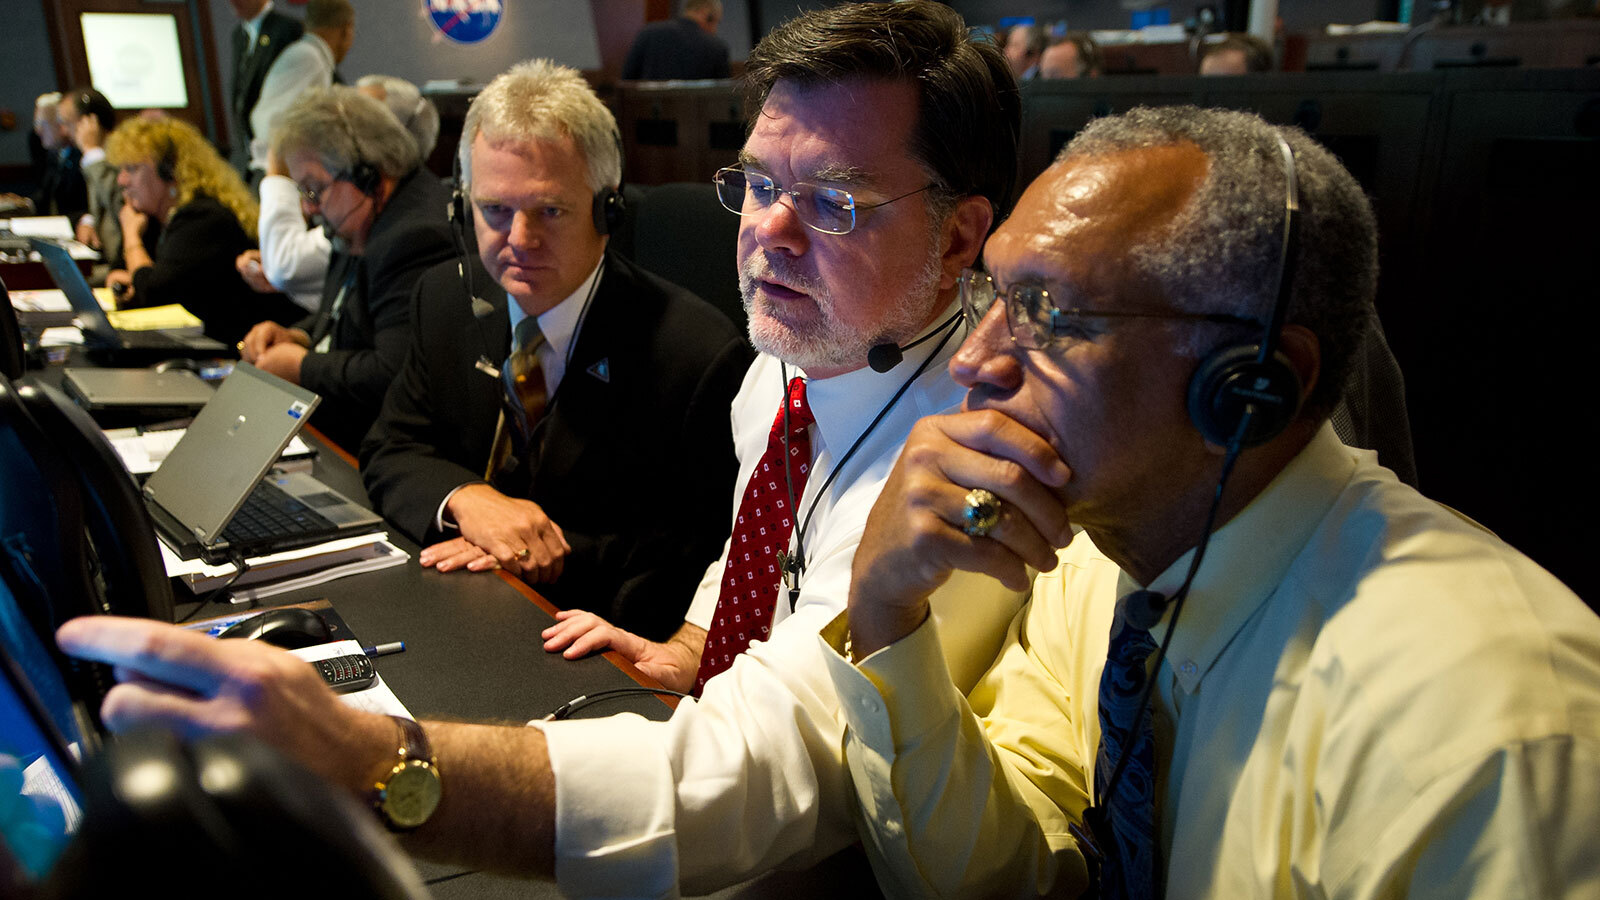 Jim_Adams_discusses_the_launch_status_of_the_GRAIL_spacecraft_with_NASA_Administrator_Charlie_Bolden